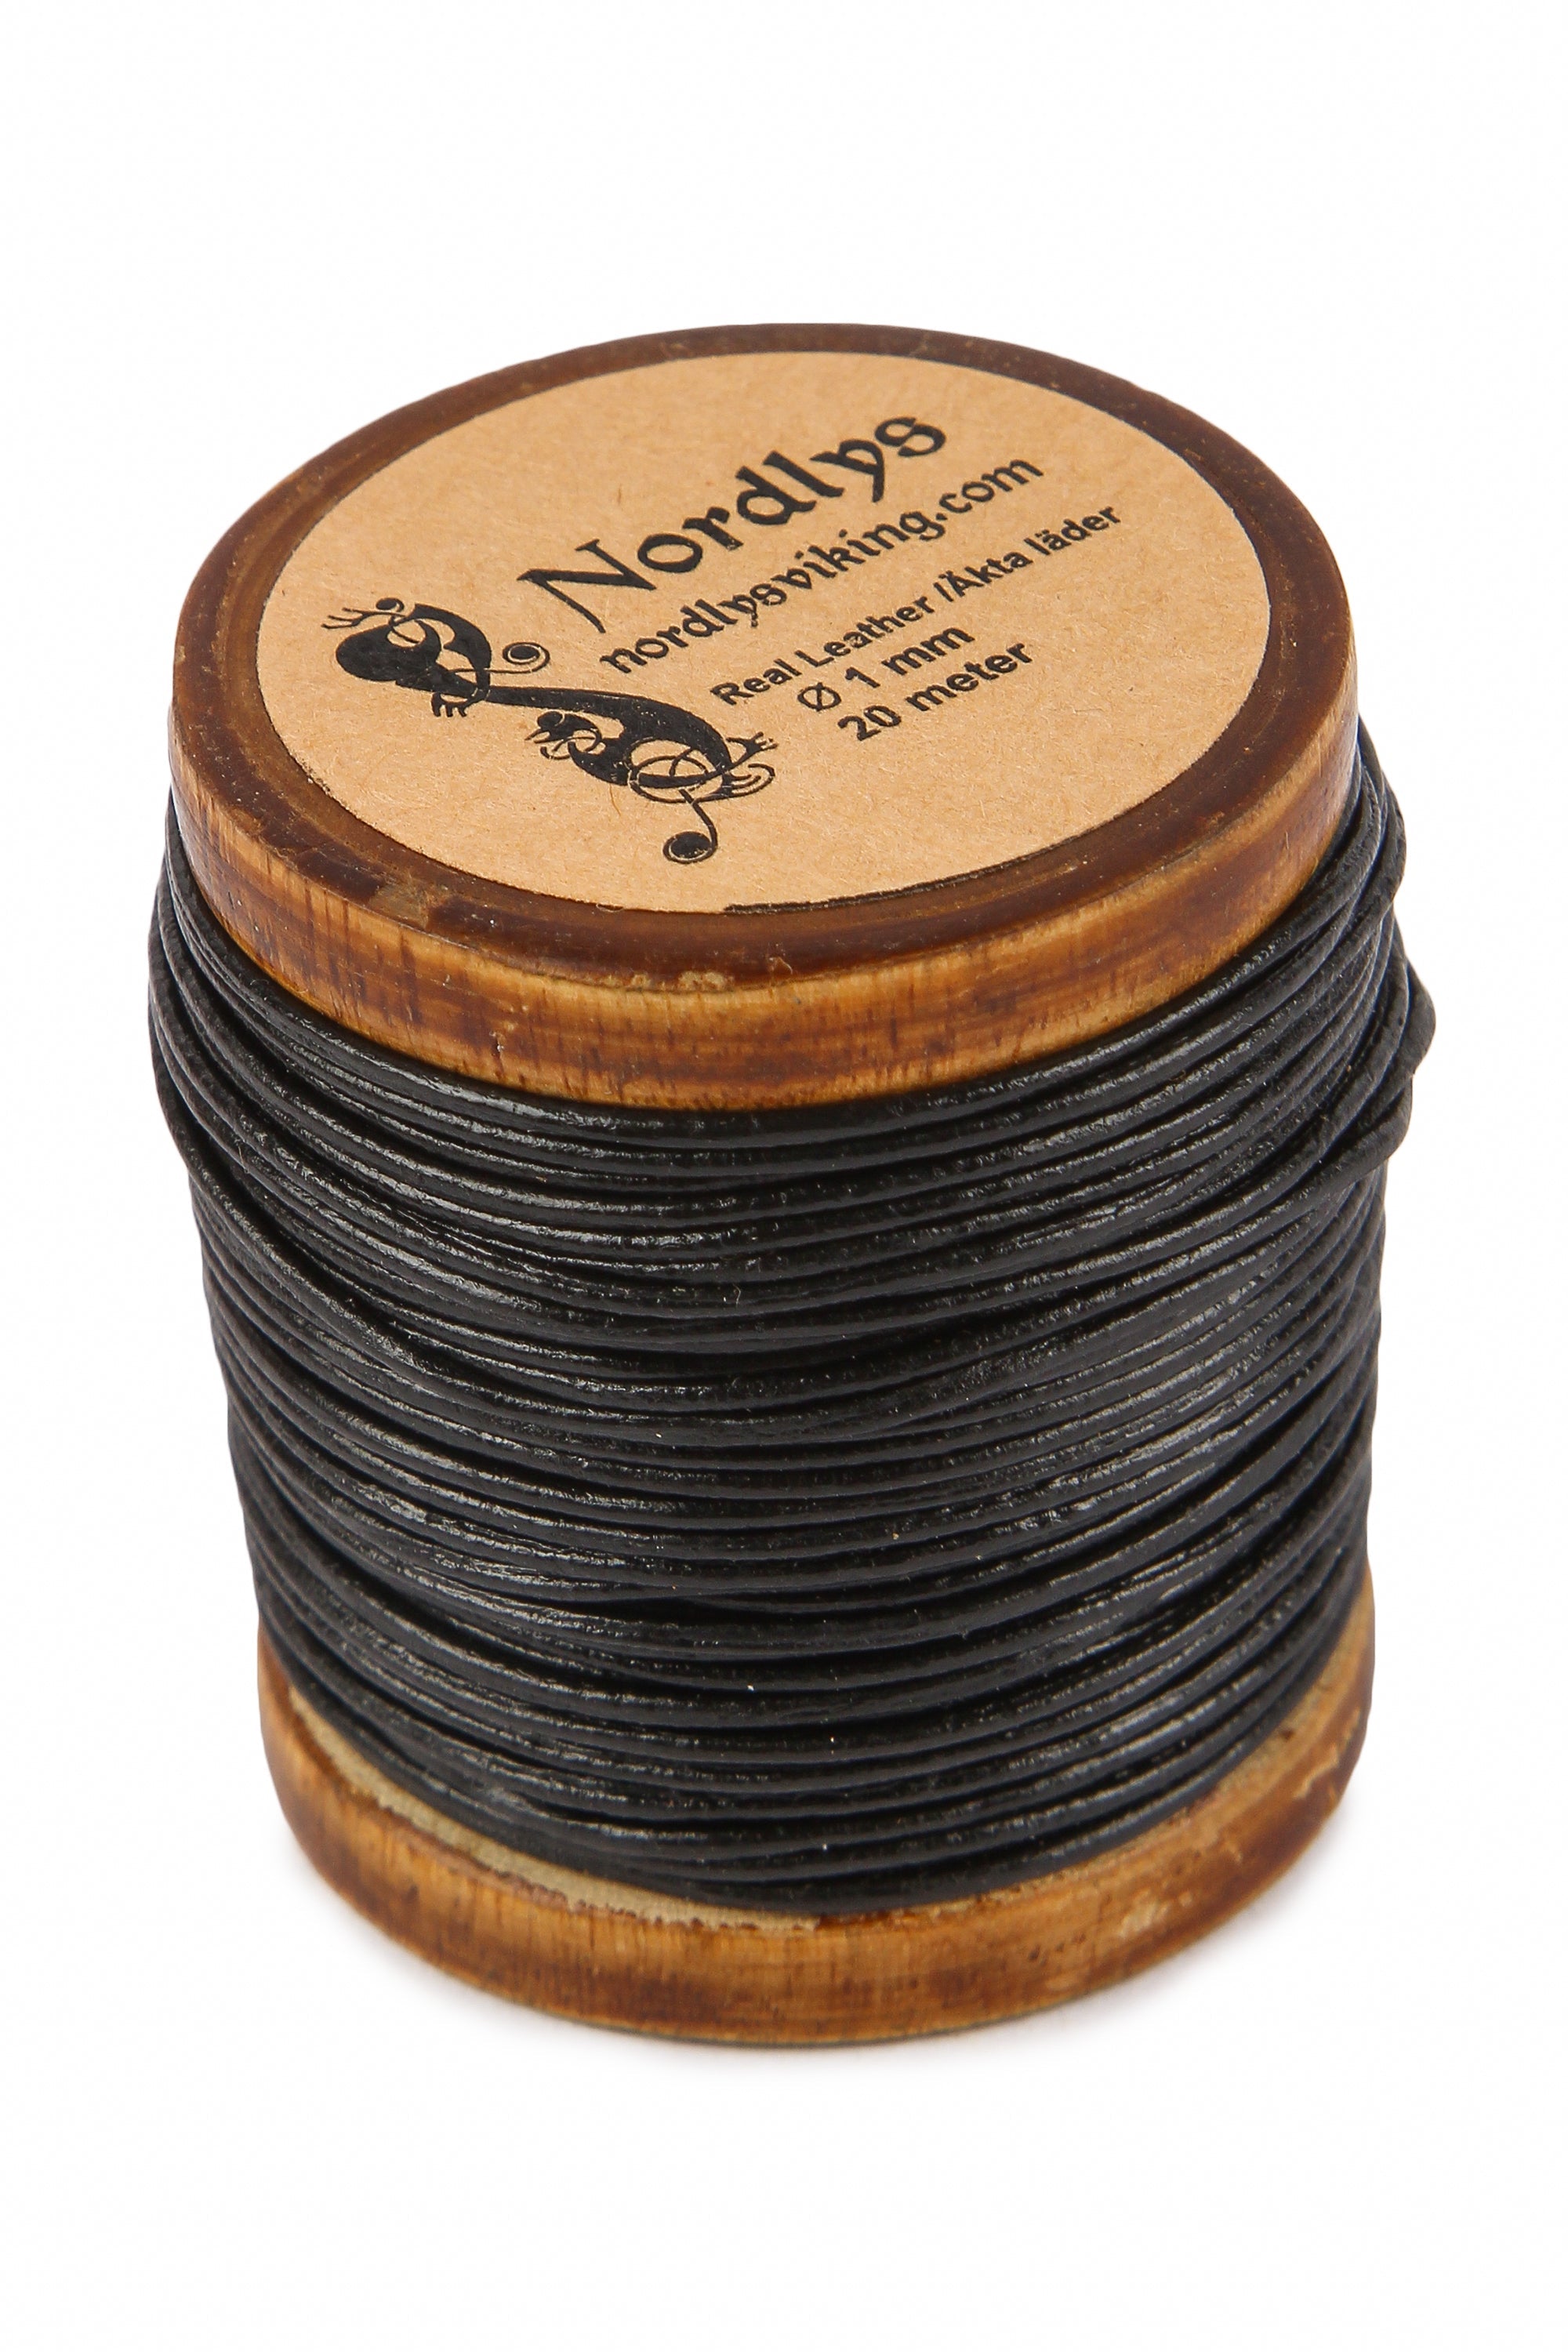 Leather string in black leather. One millimeter thick and 20 meters long. High quality string that is seamless and made from natural leather. Rolled onto a traditional wooden spool.